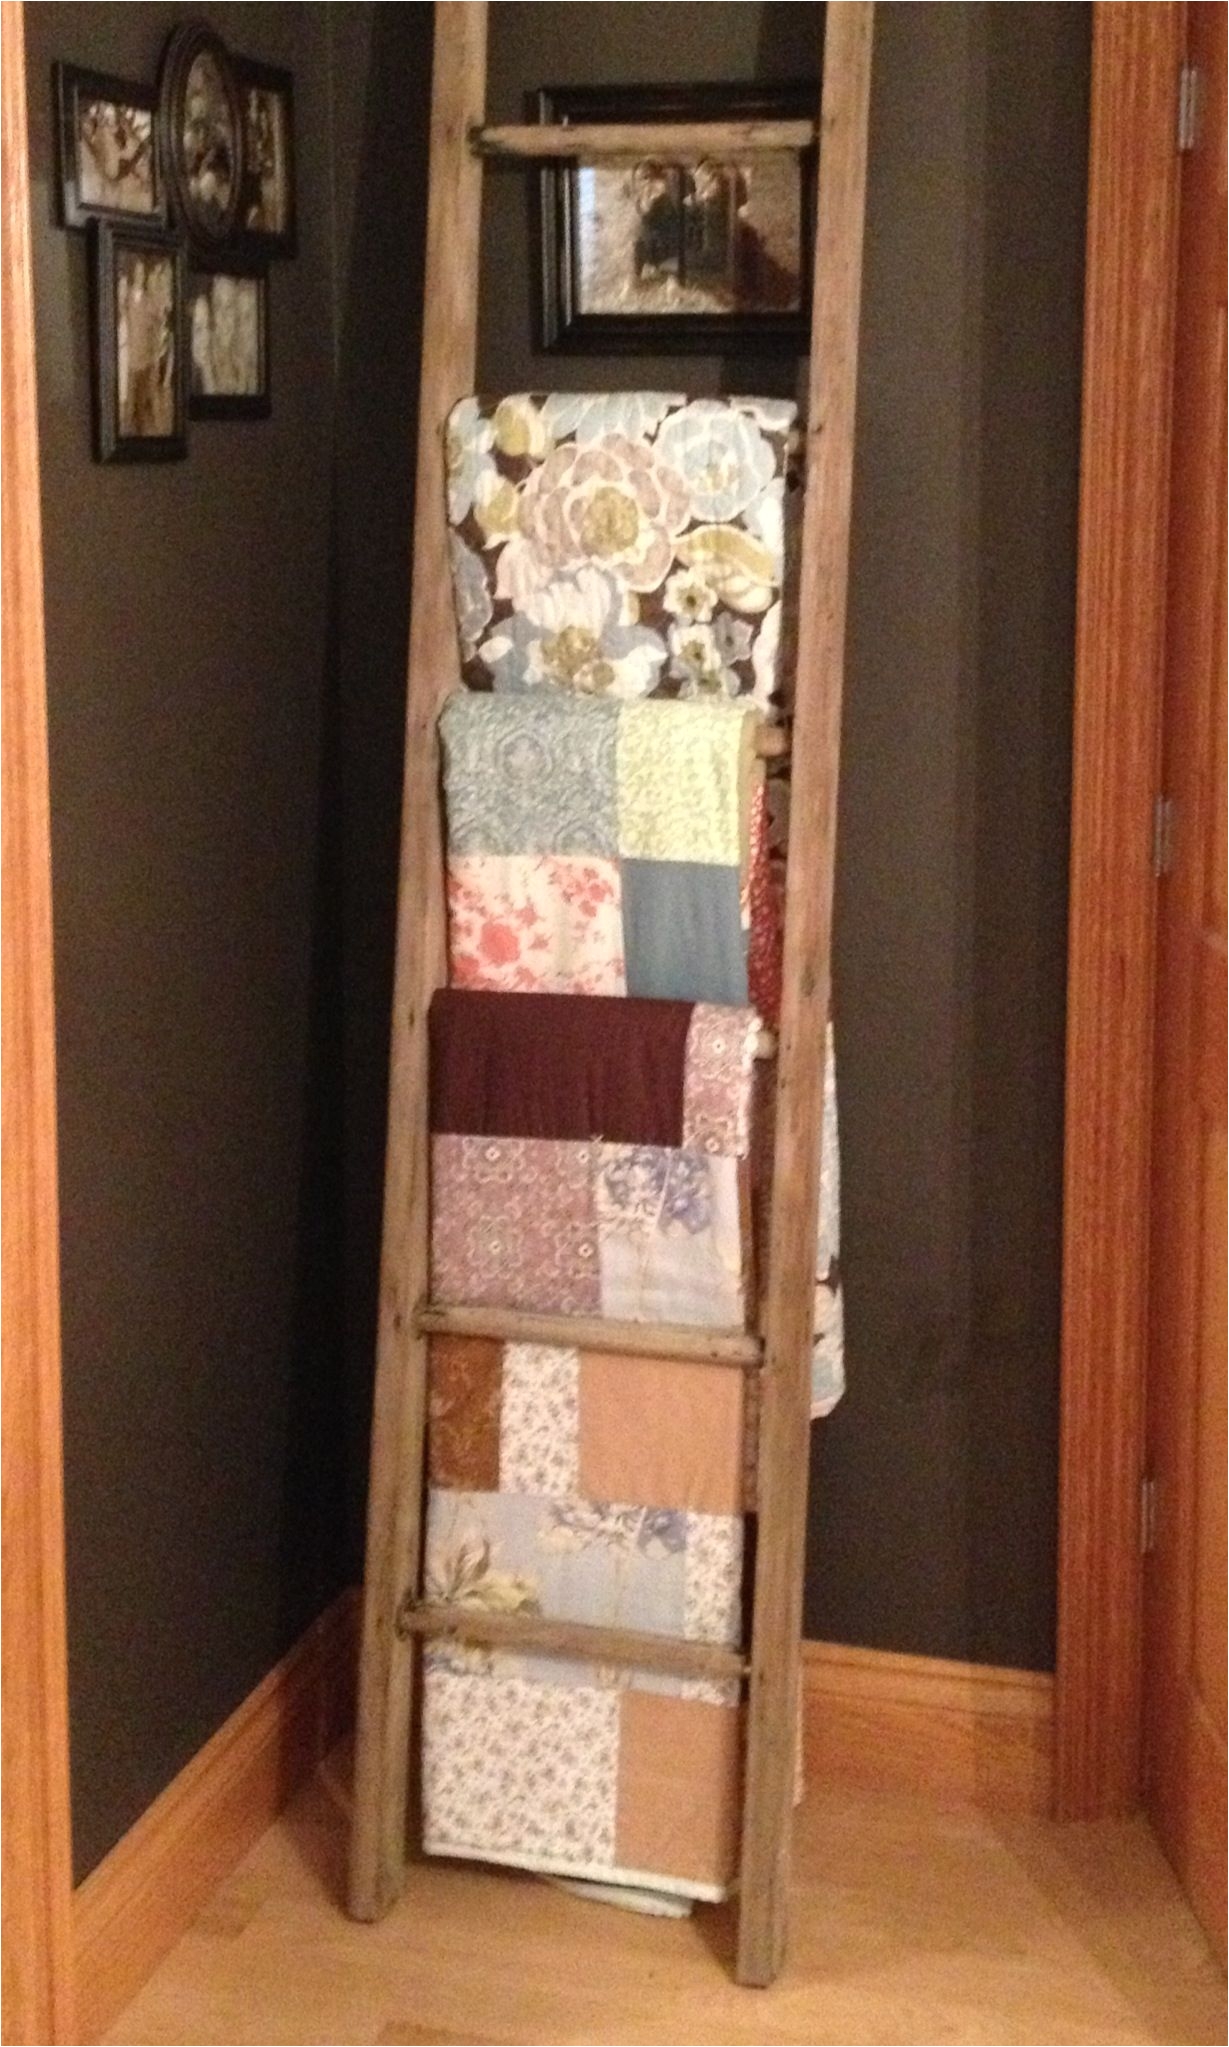 Amish Wall Mounted Quilt Rack Ladder Quilt Rack Ideas for Mom Pinterest Quilt Ladder